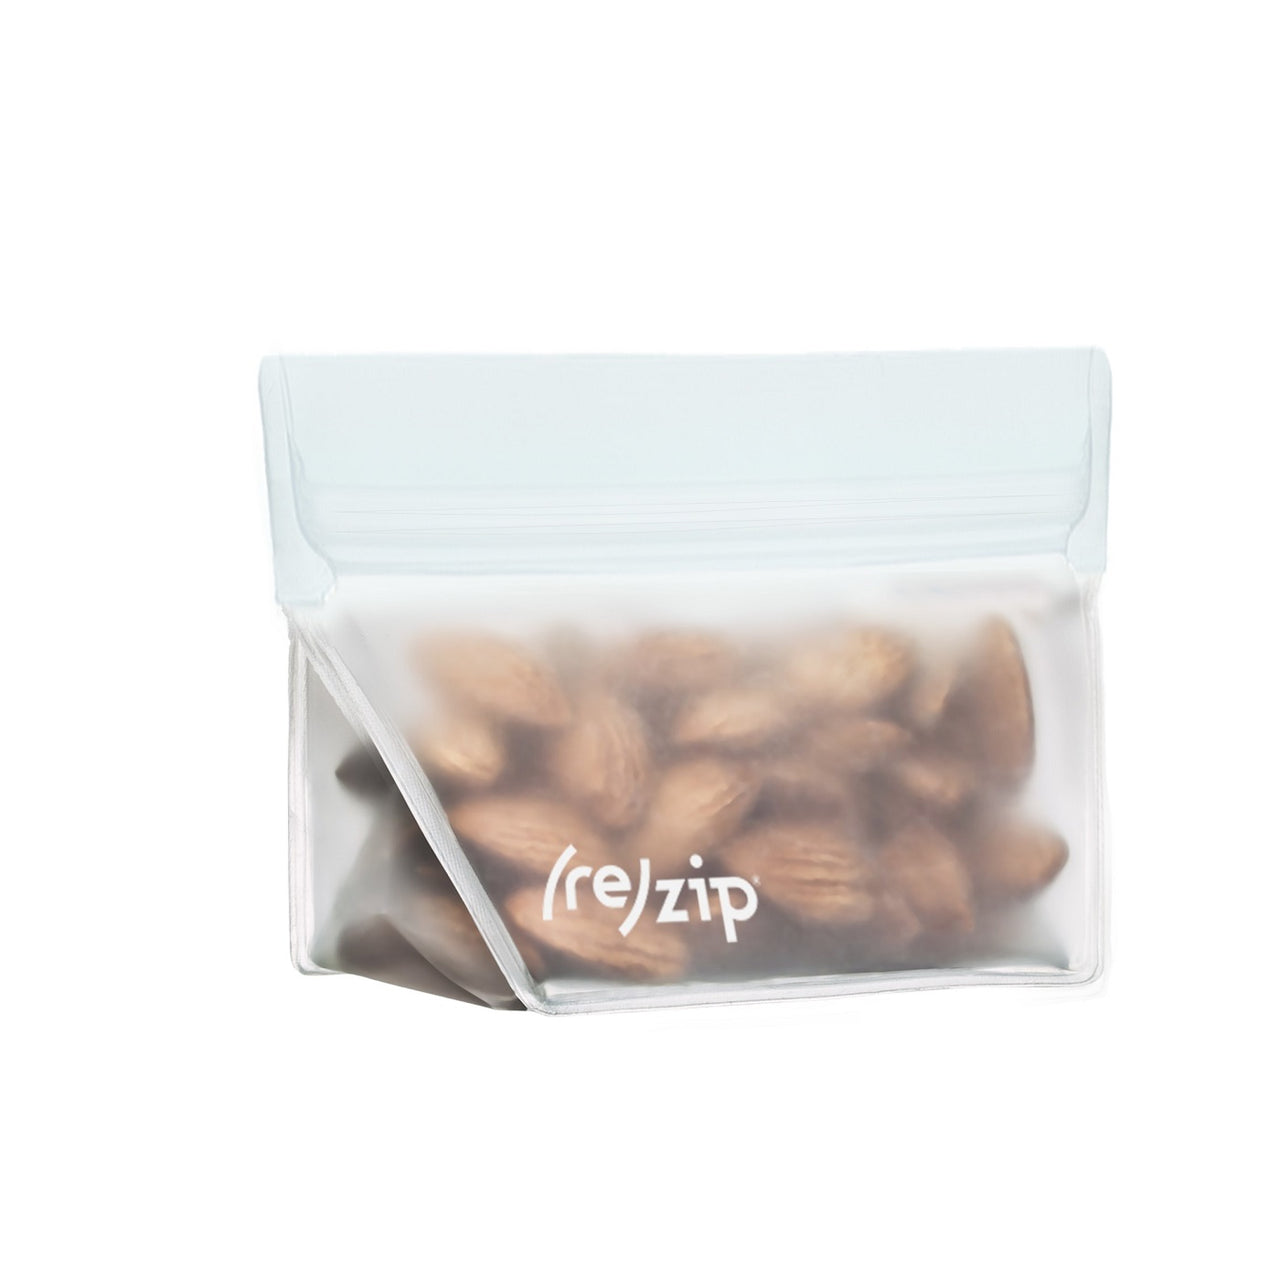 https://cdn.shopify.com/s/files/1/1580/2417/products/Stand_Up_1_Piece_Clears_4_oz_Almonds.jpg?v=1660065467&width=1280